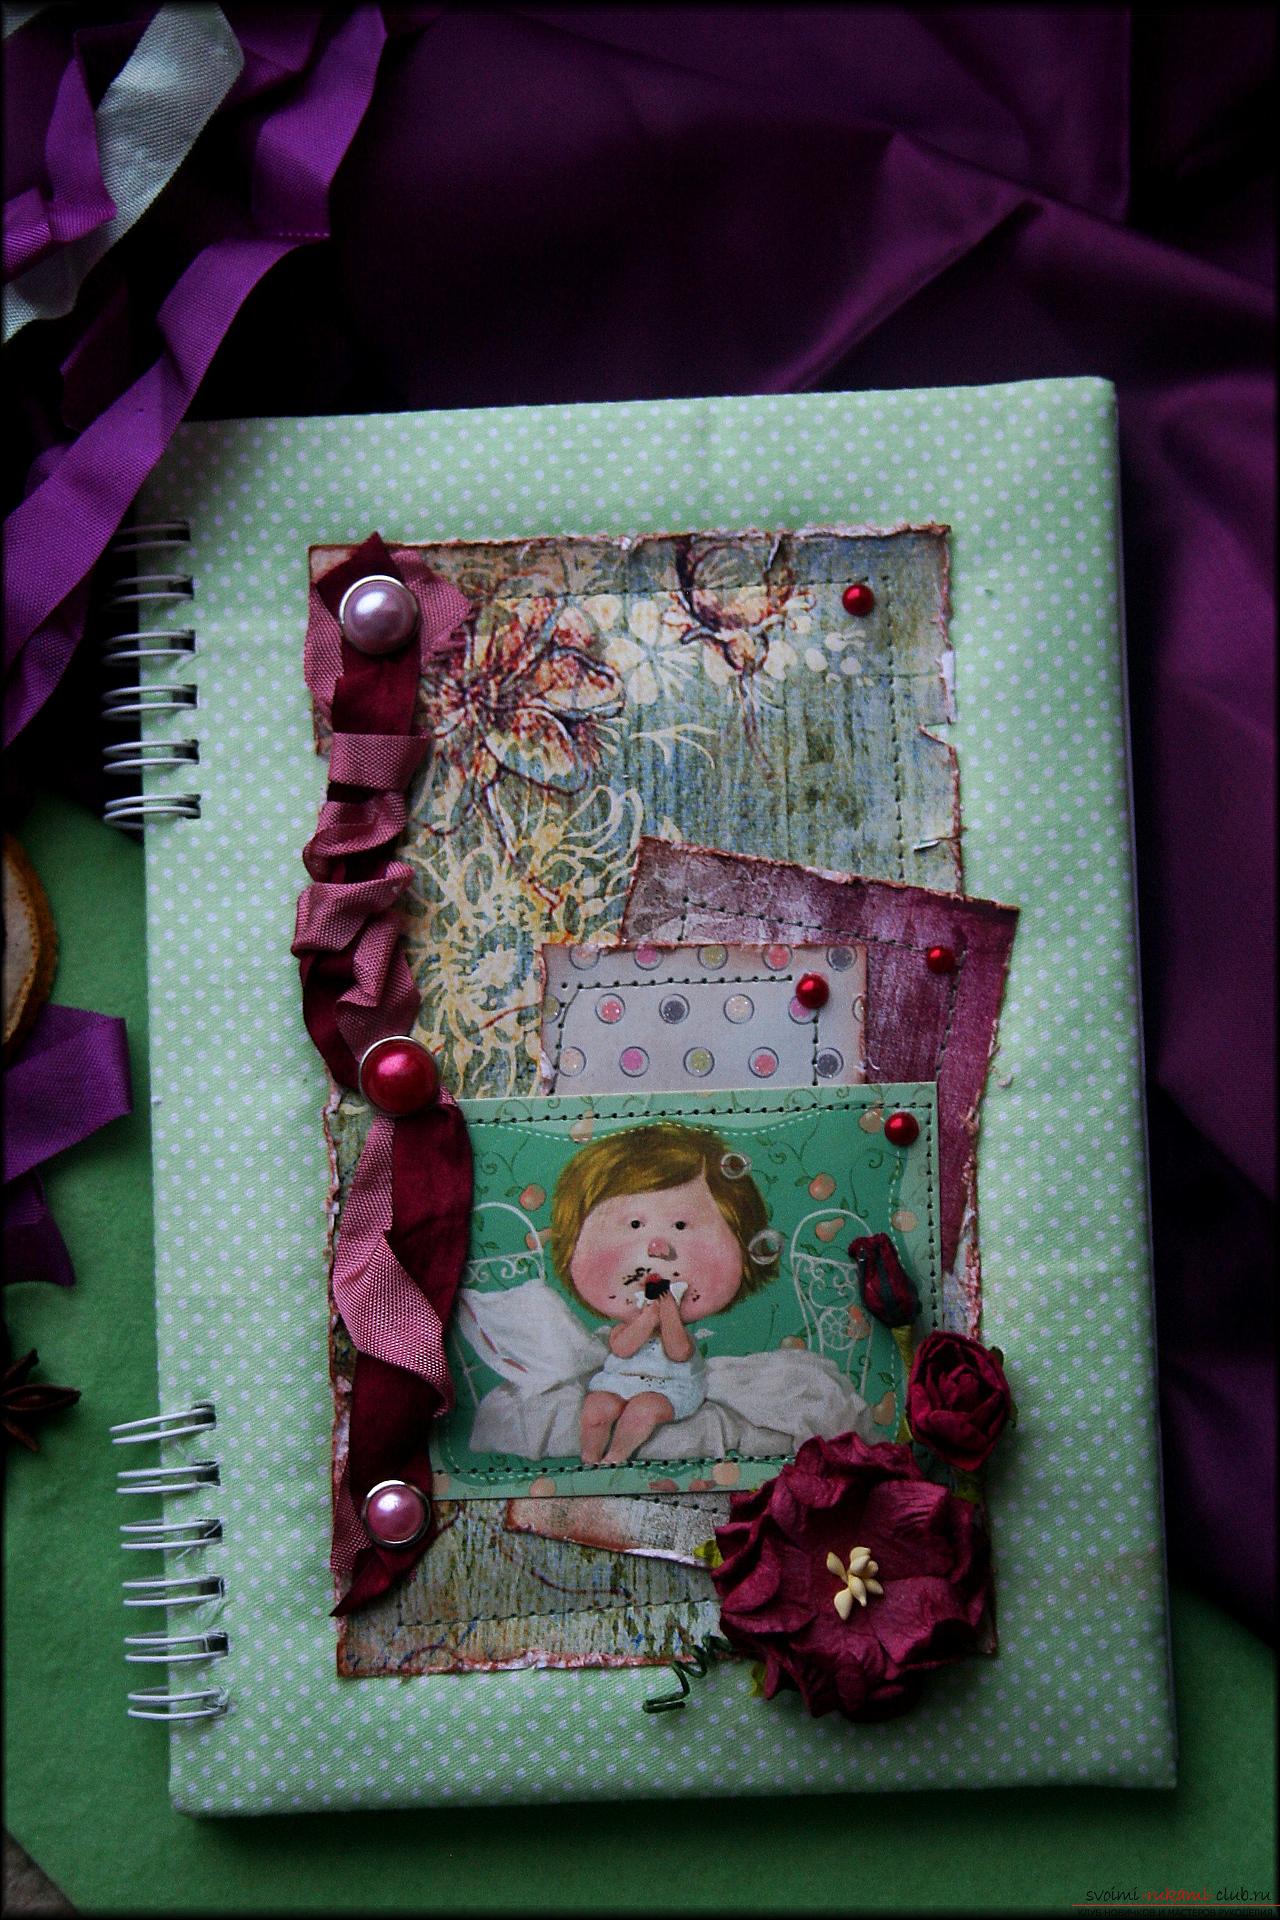 This master class will teach you how to create a notebook using scrapbooking techniques. Photo №1